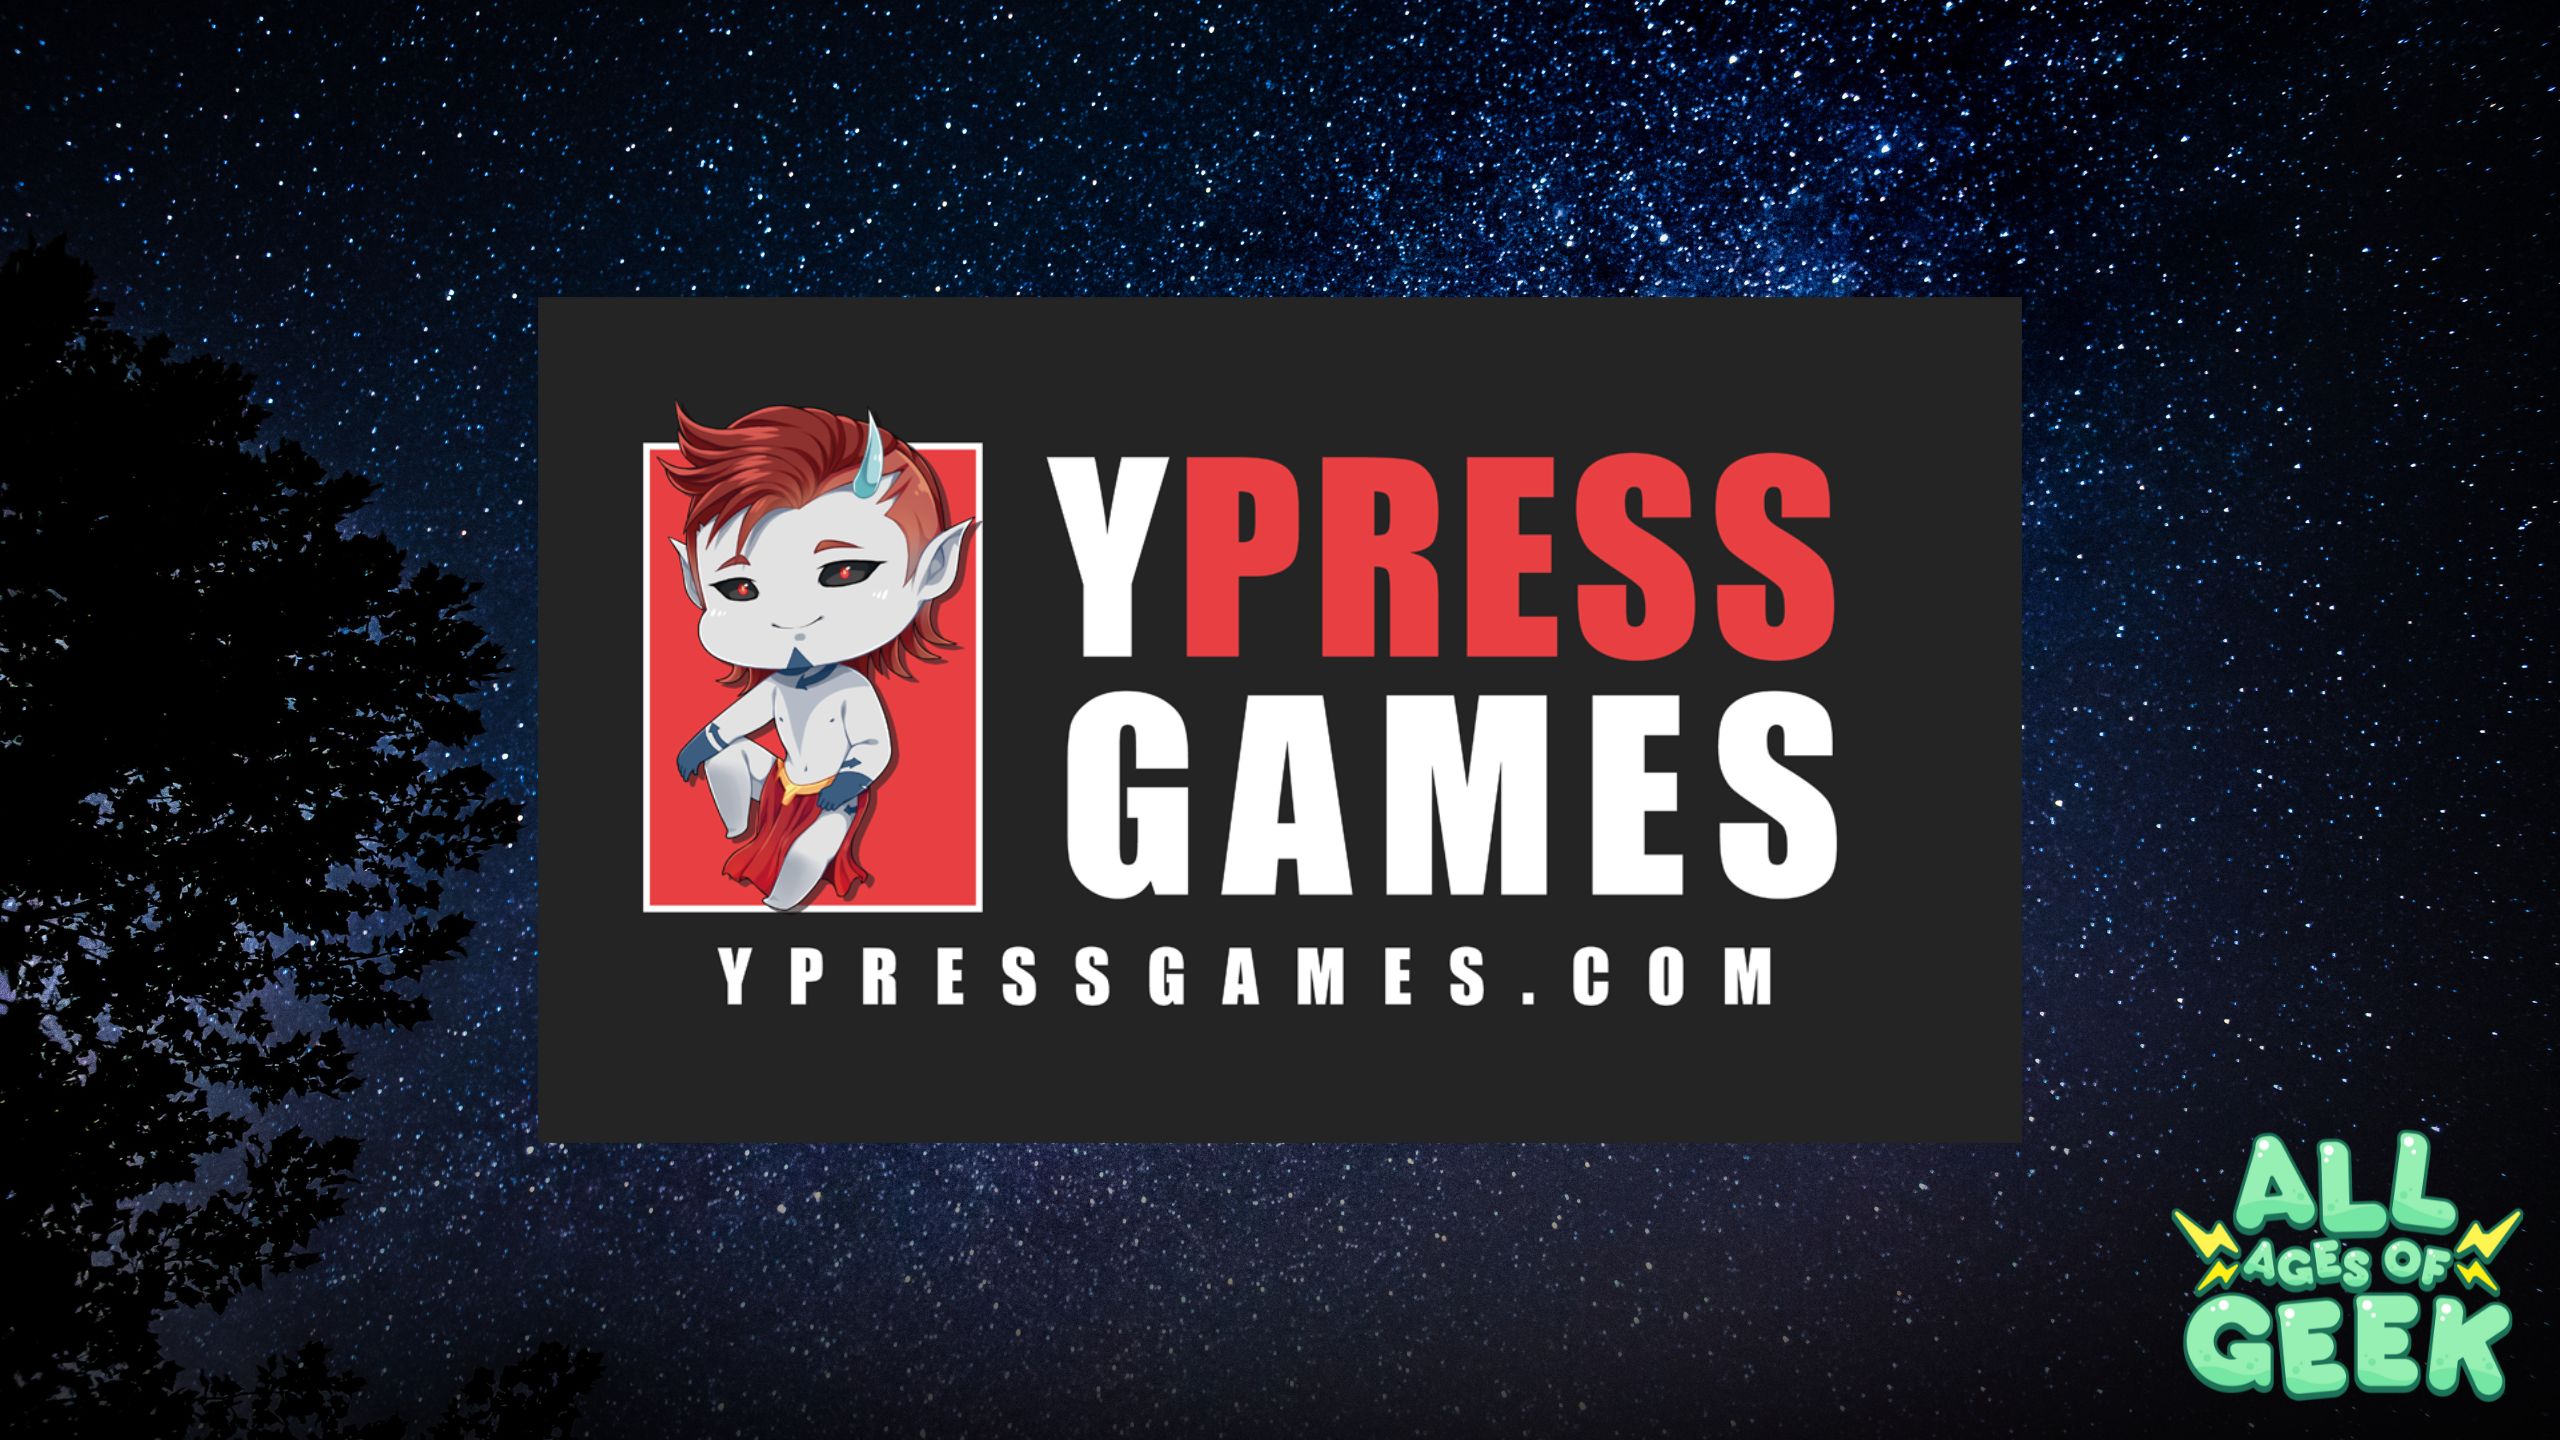 All Ages of Geek Y Press Games Yaoi Interview